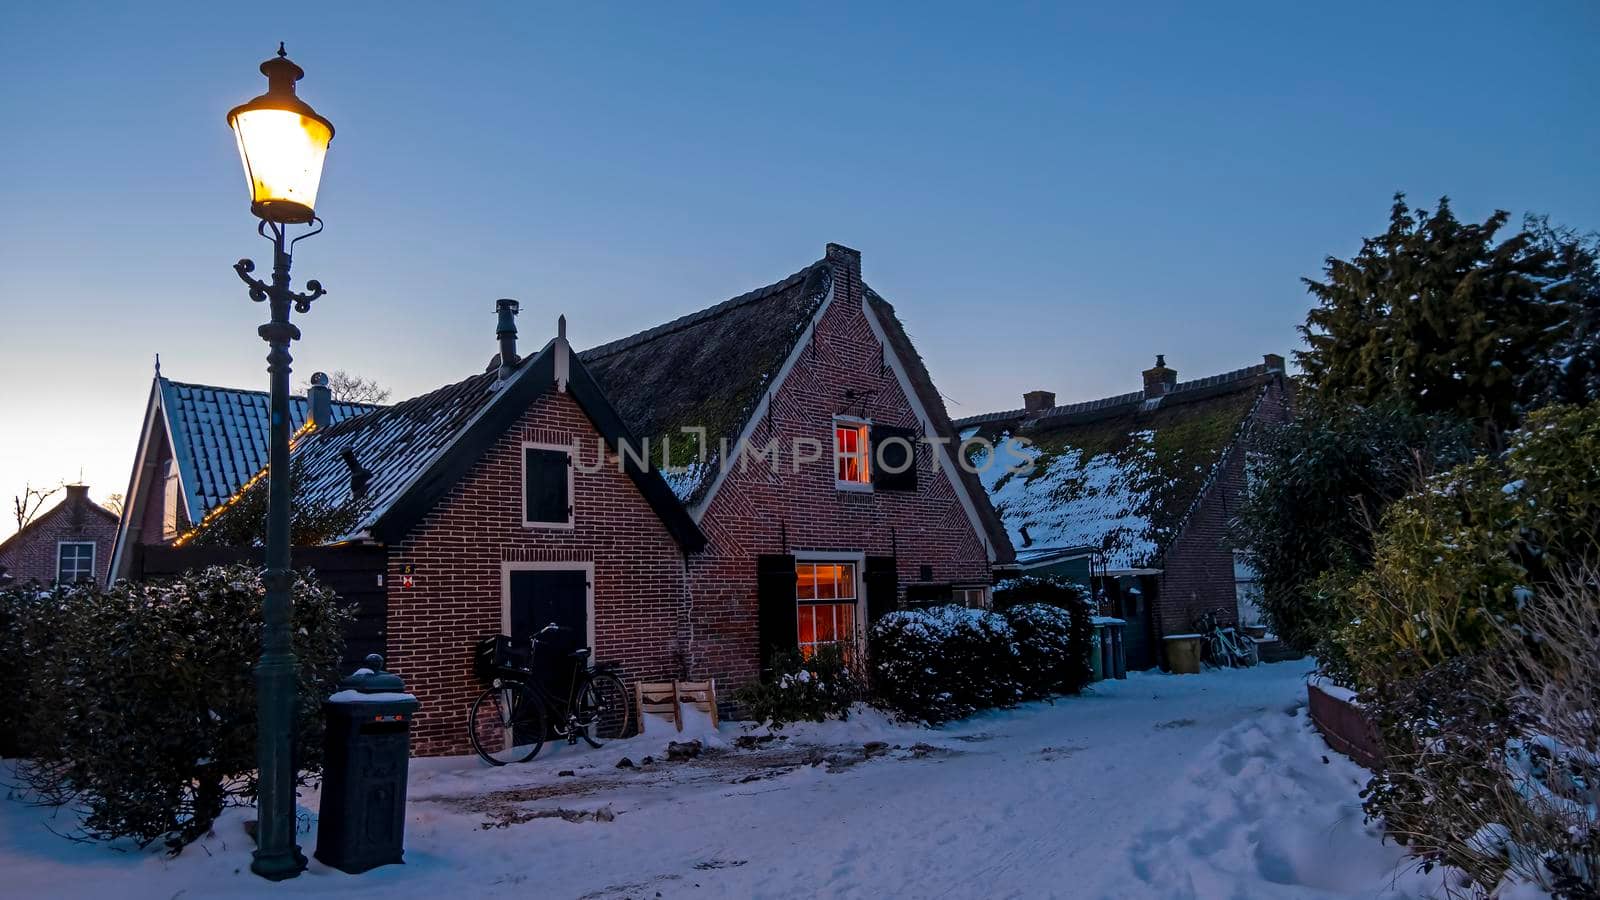 Snowy old traditional dutch houses in the countryside from the Netherlands in winter